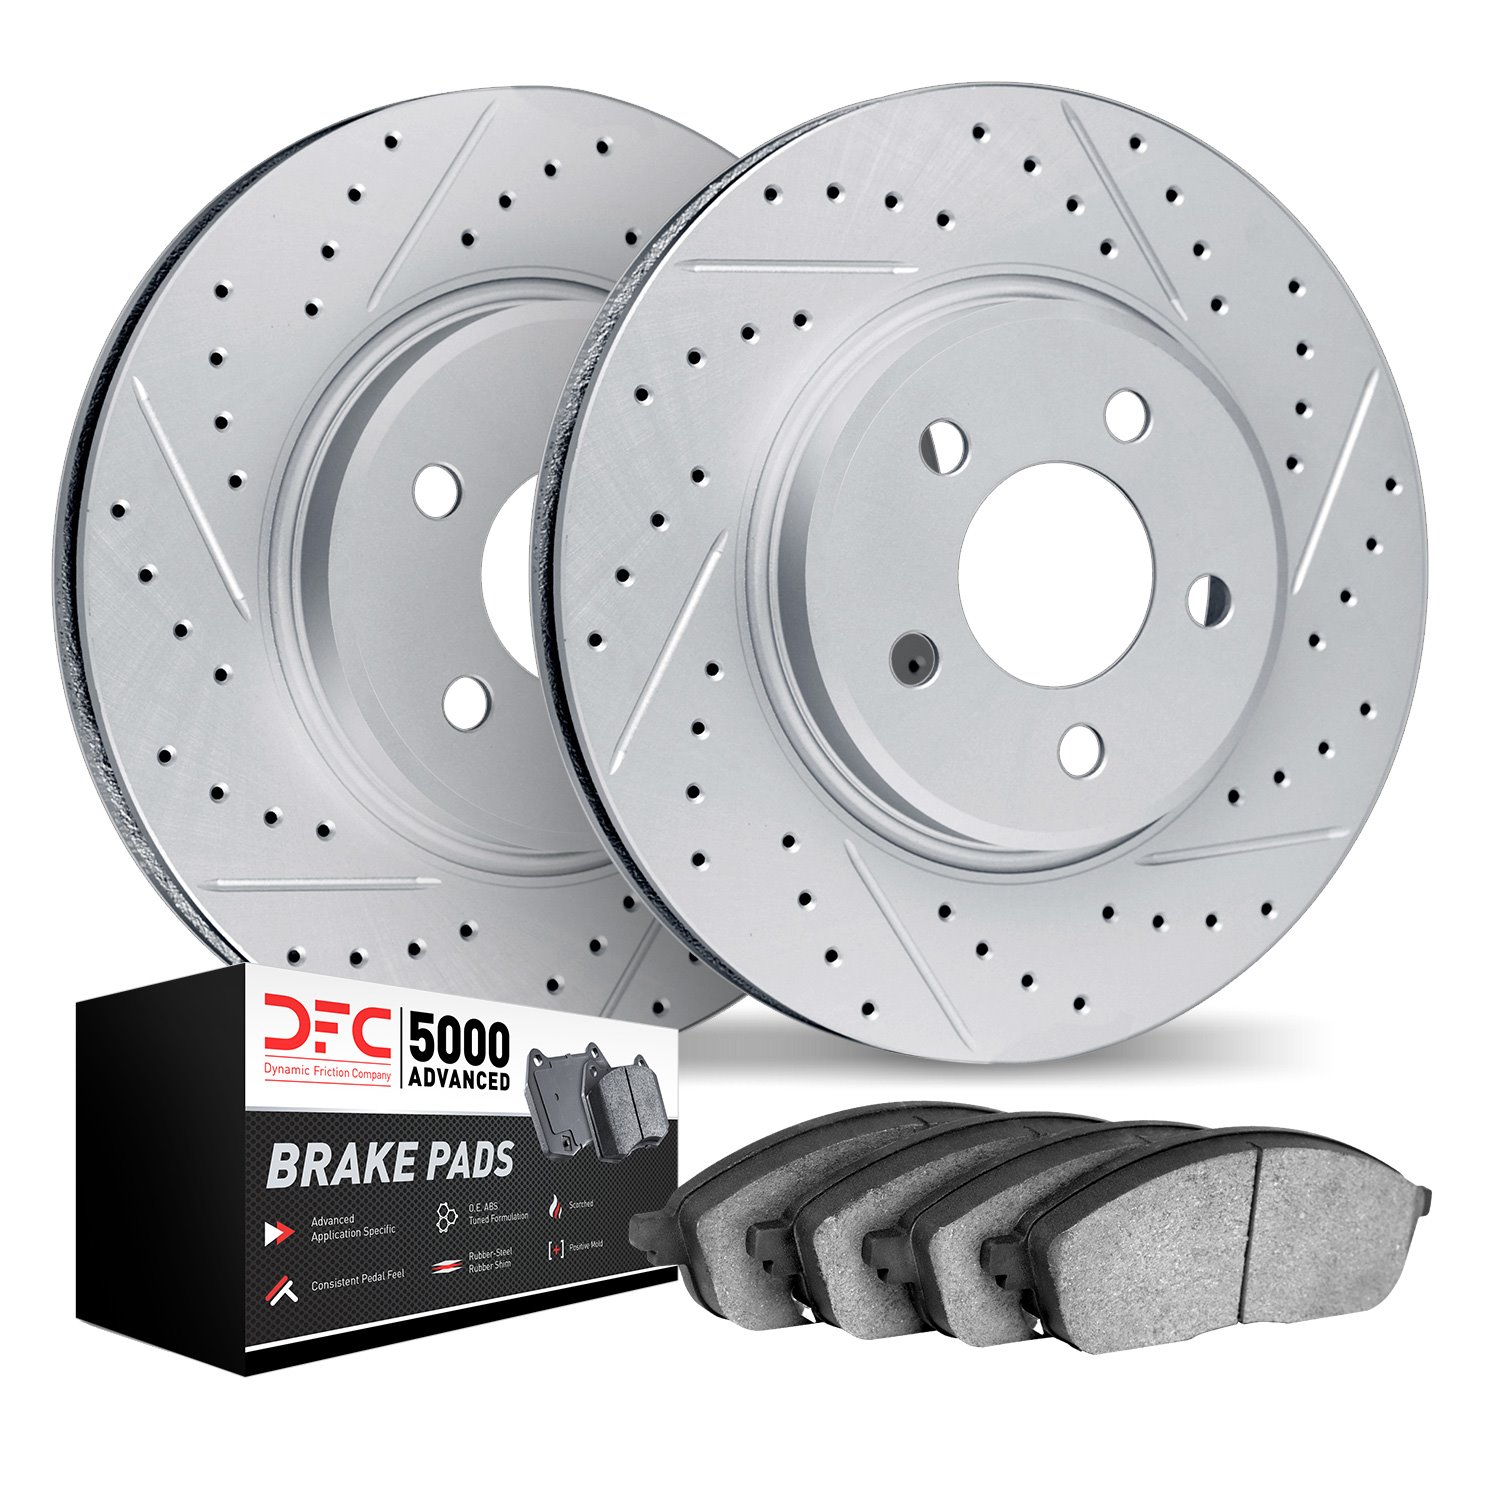 2502-31144 Geoperformance Drilled/Slotted Rotors w/5000 Advanced Brake Pads Kit, Fits Select BMW, Position: Front